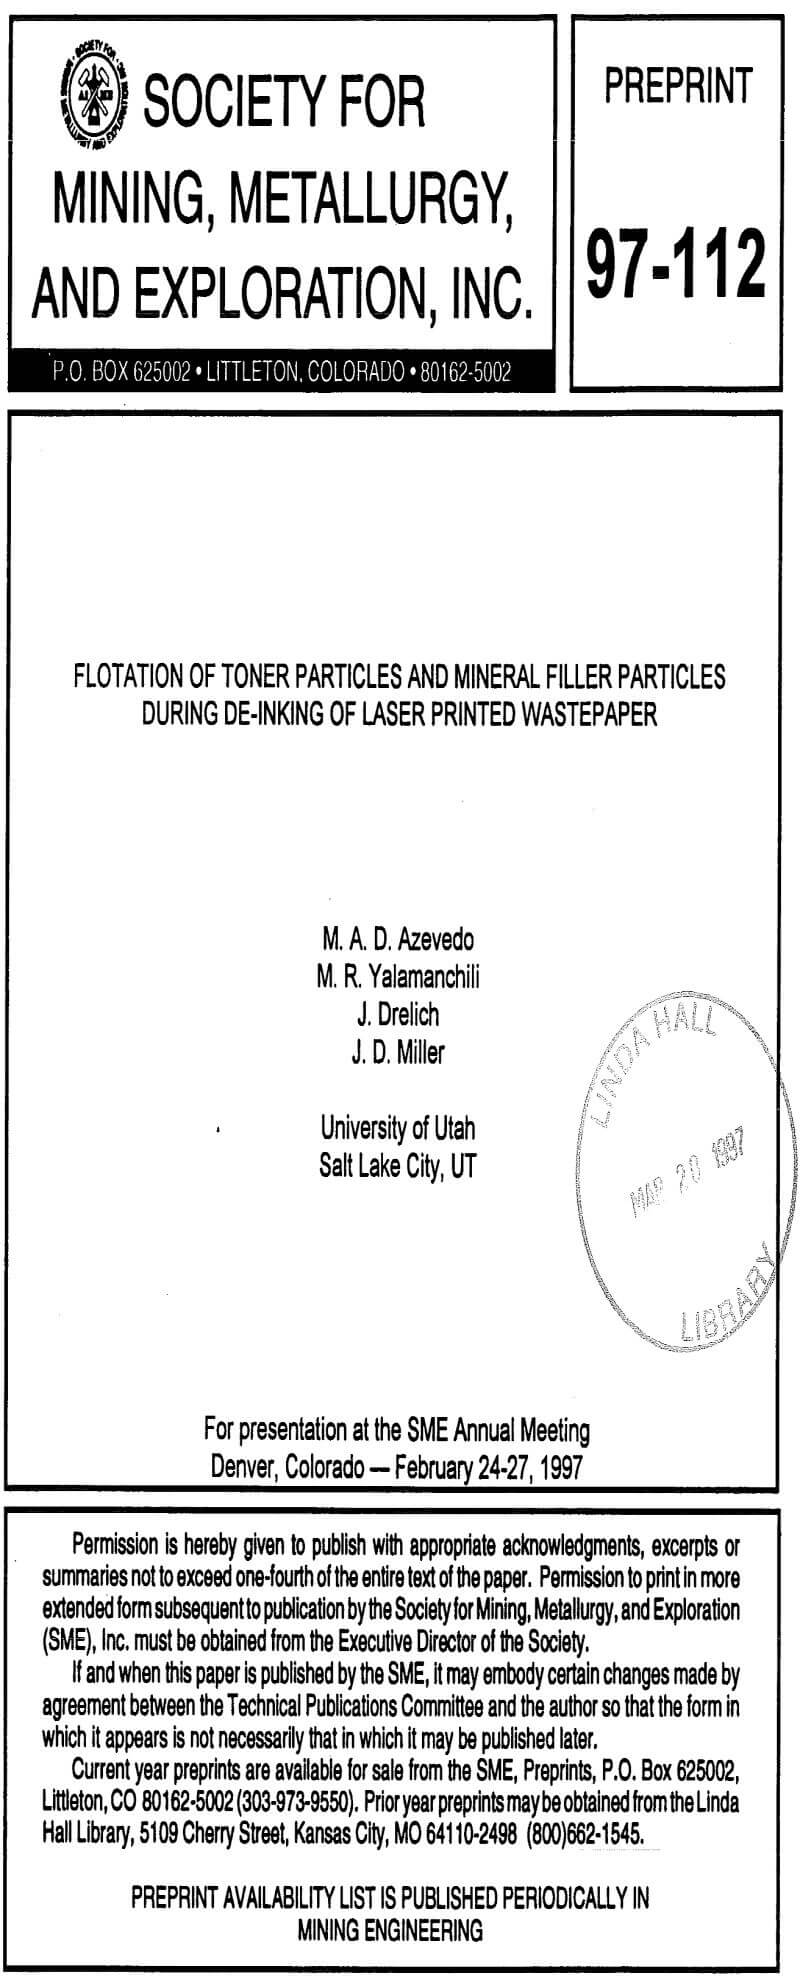 flotation of toner particles and mineral filler particles during de-inking of laser printed wastepaper